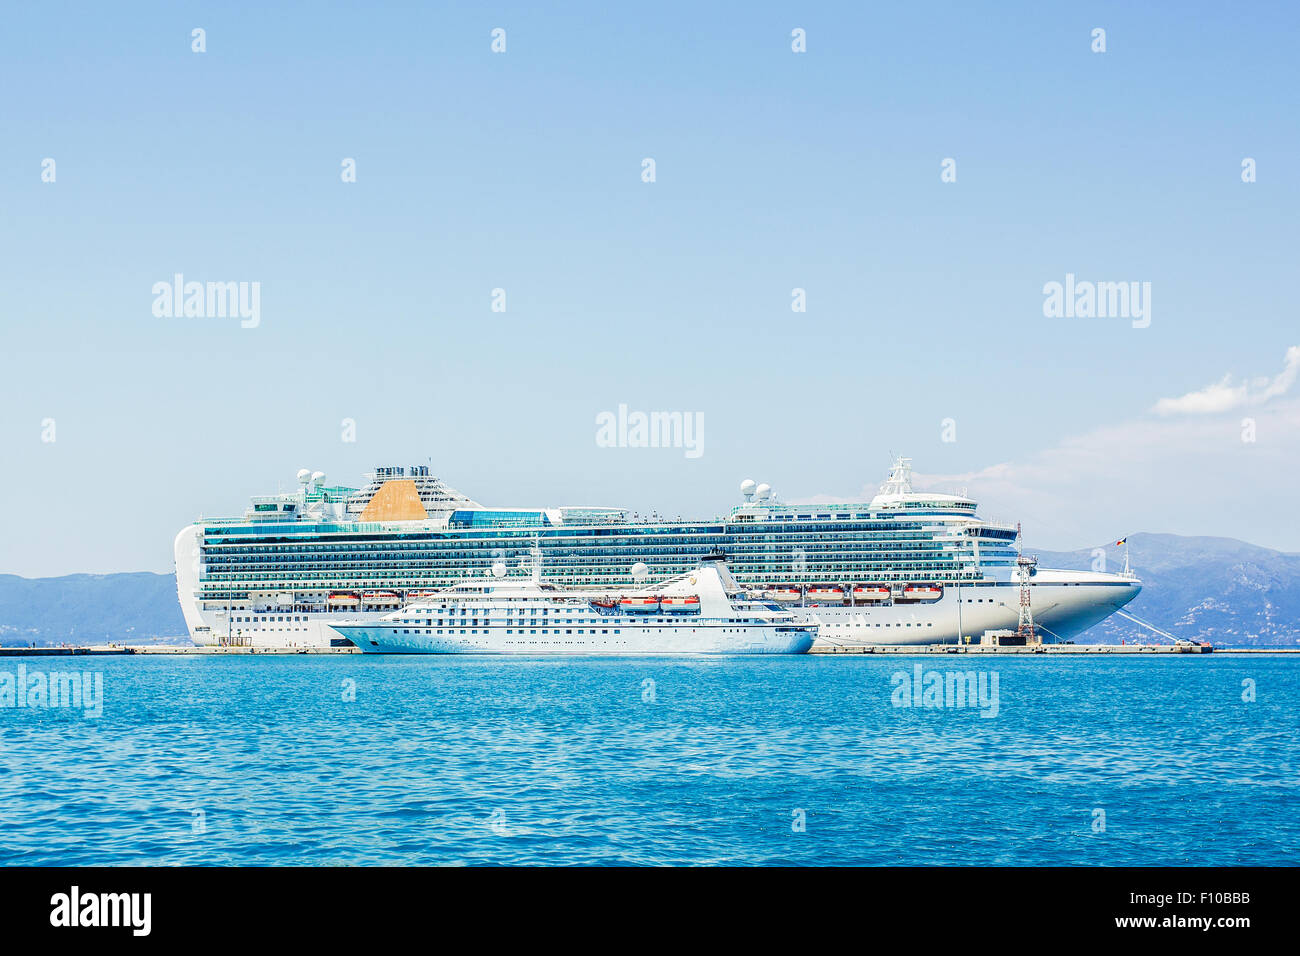 Luxury cruise ship docked at port. Cruise liner anchored at seaport of Corfu, Greece. Stock Photo